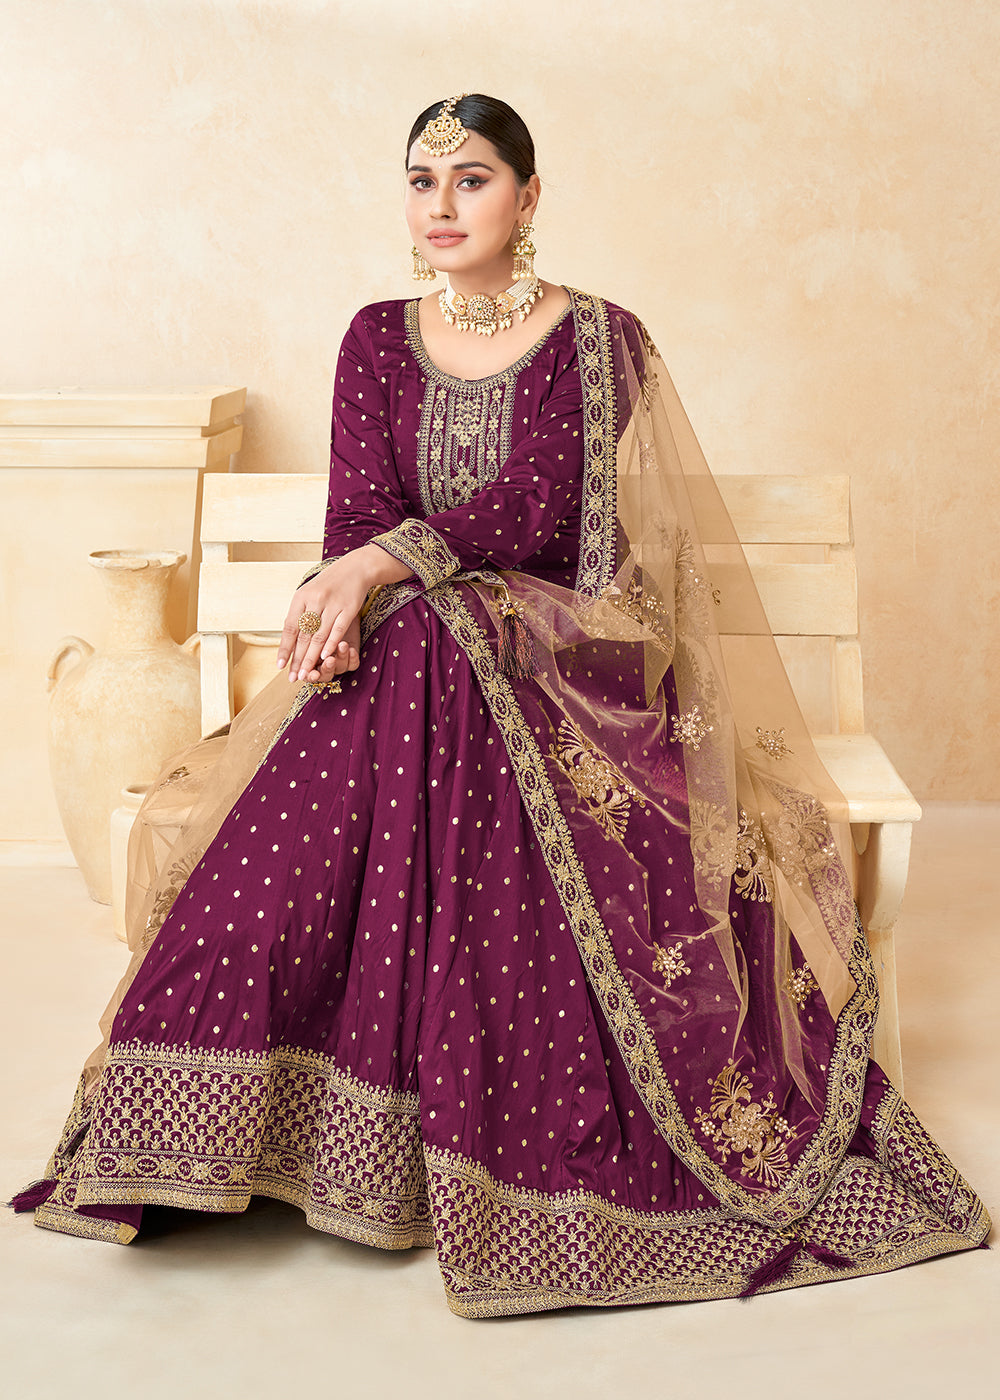 Buy Now Purple Silk Embroidered Indian Ethnic Wear Anarkali Dress Online in USA, UK, Australia, New Zealand, Canada & Worldwide at Empress Clothing.